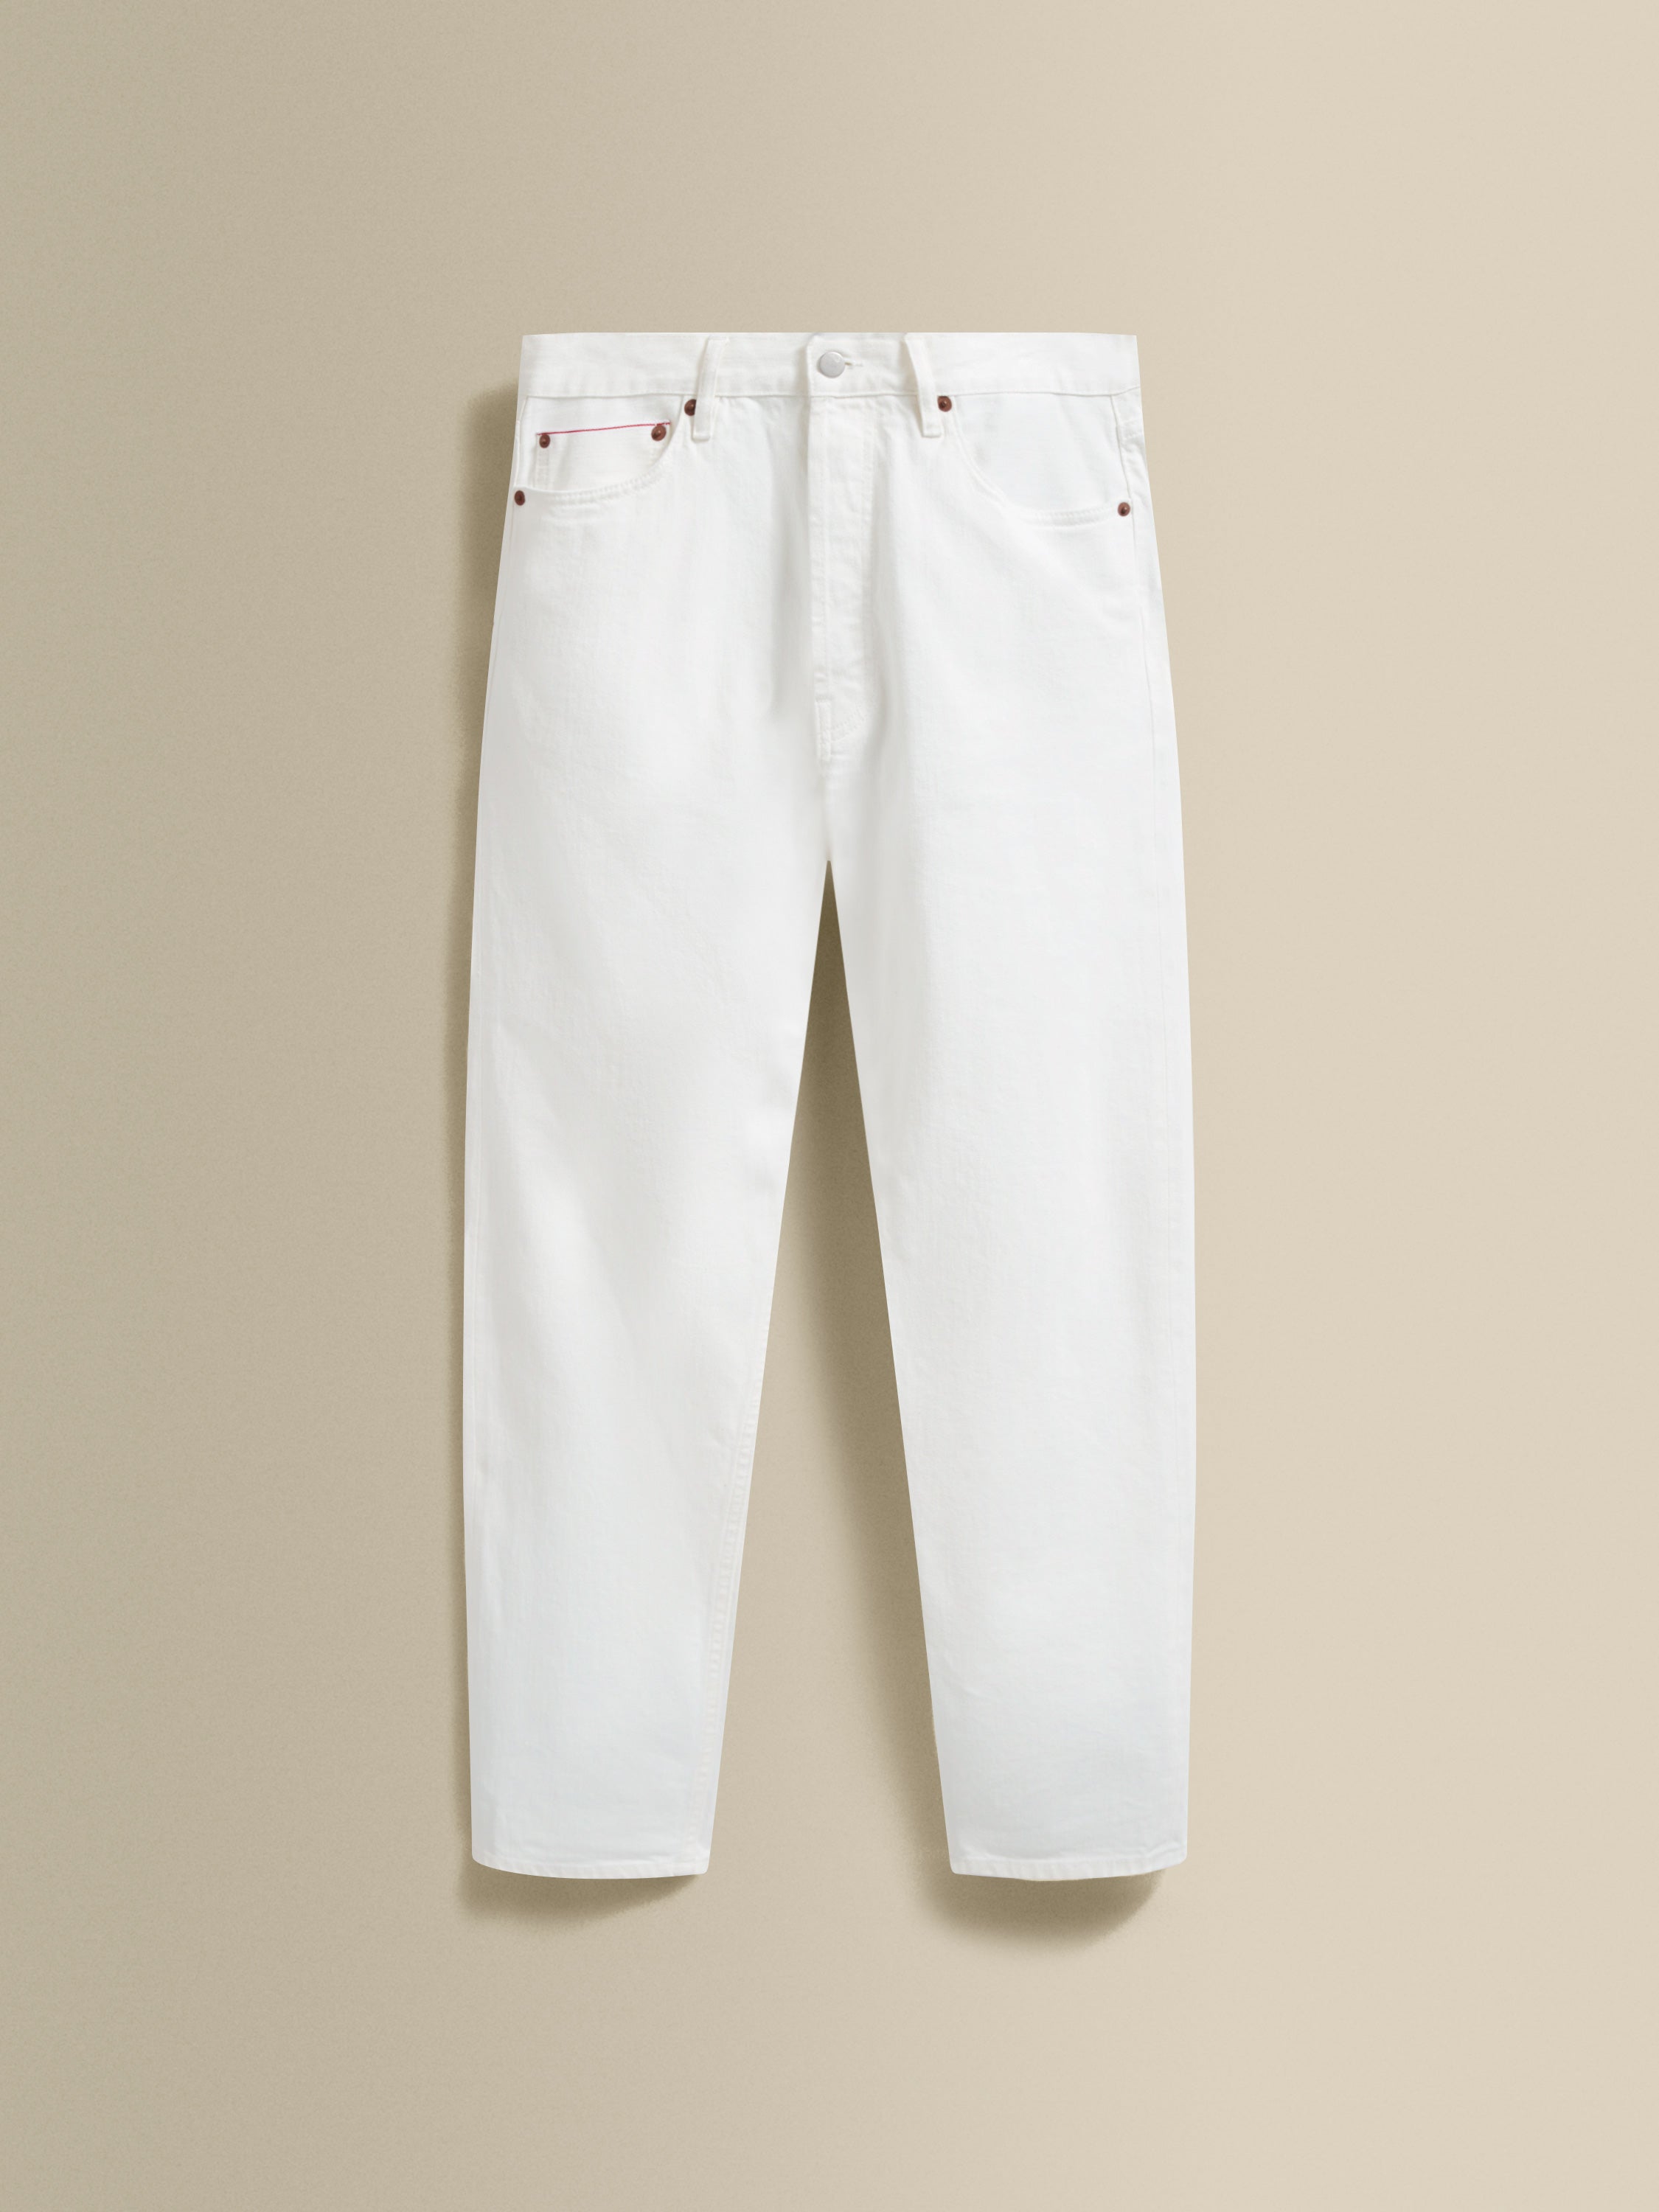 Denim Easy Fit Jeans White Product Image